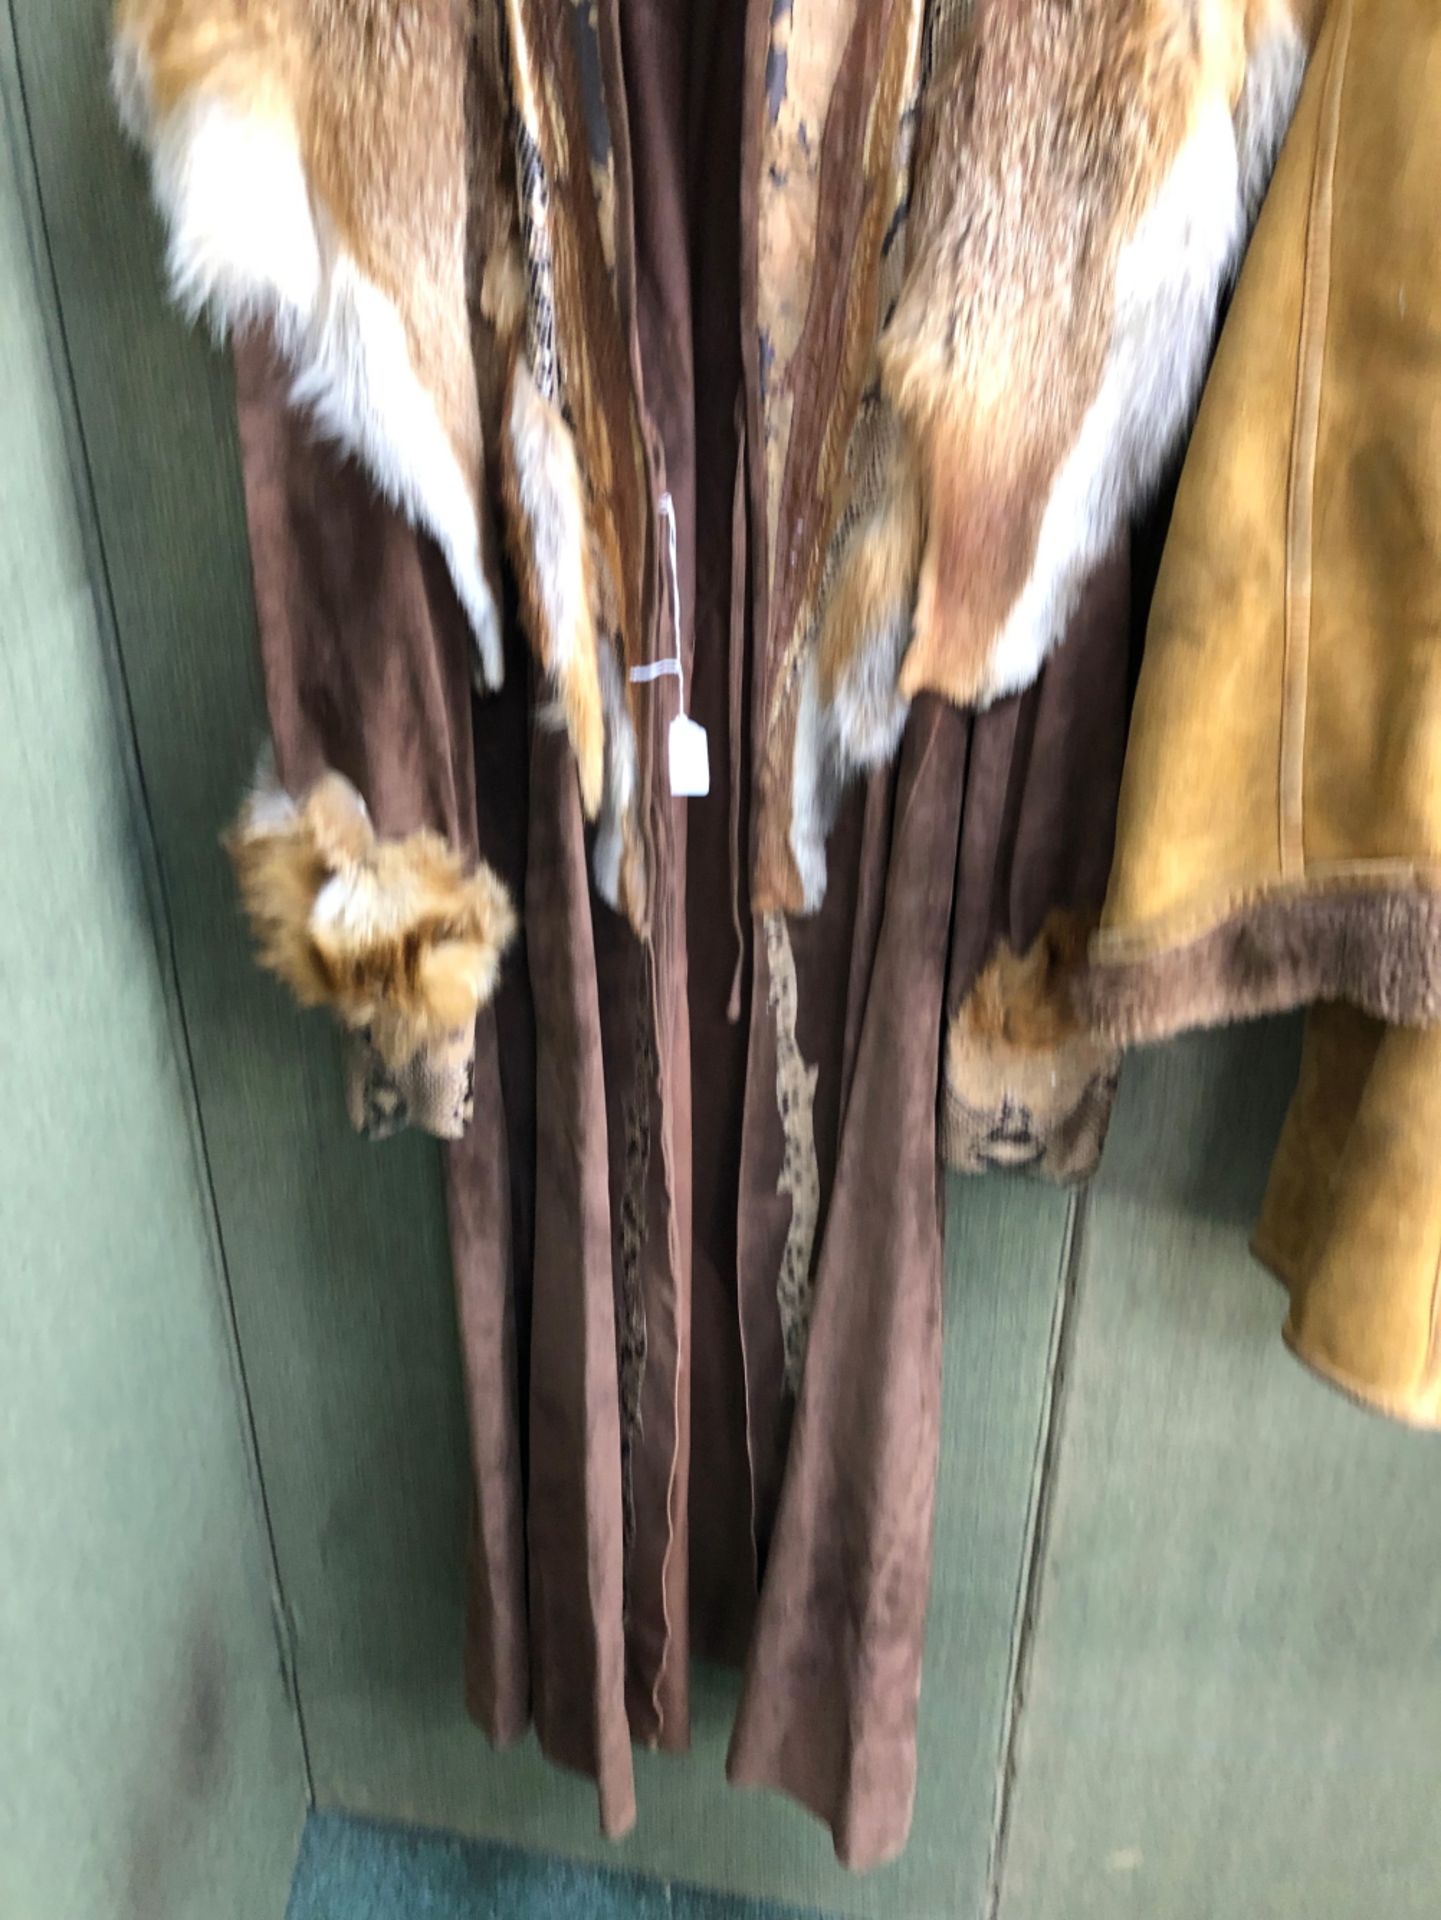 JACKETS: STRIWA 3/4 LENGTH FAWN COLOURED SHEEP SKIN JACKET WITH HOOD SIZE STATED EUR 36, TOGETHER - Image 3 of 21